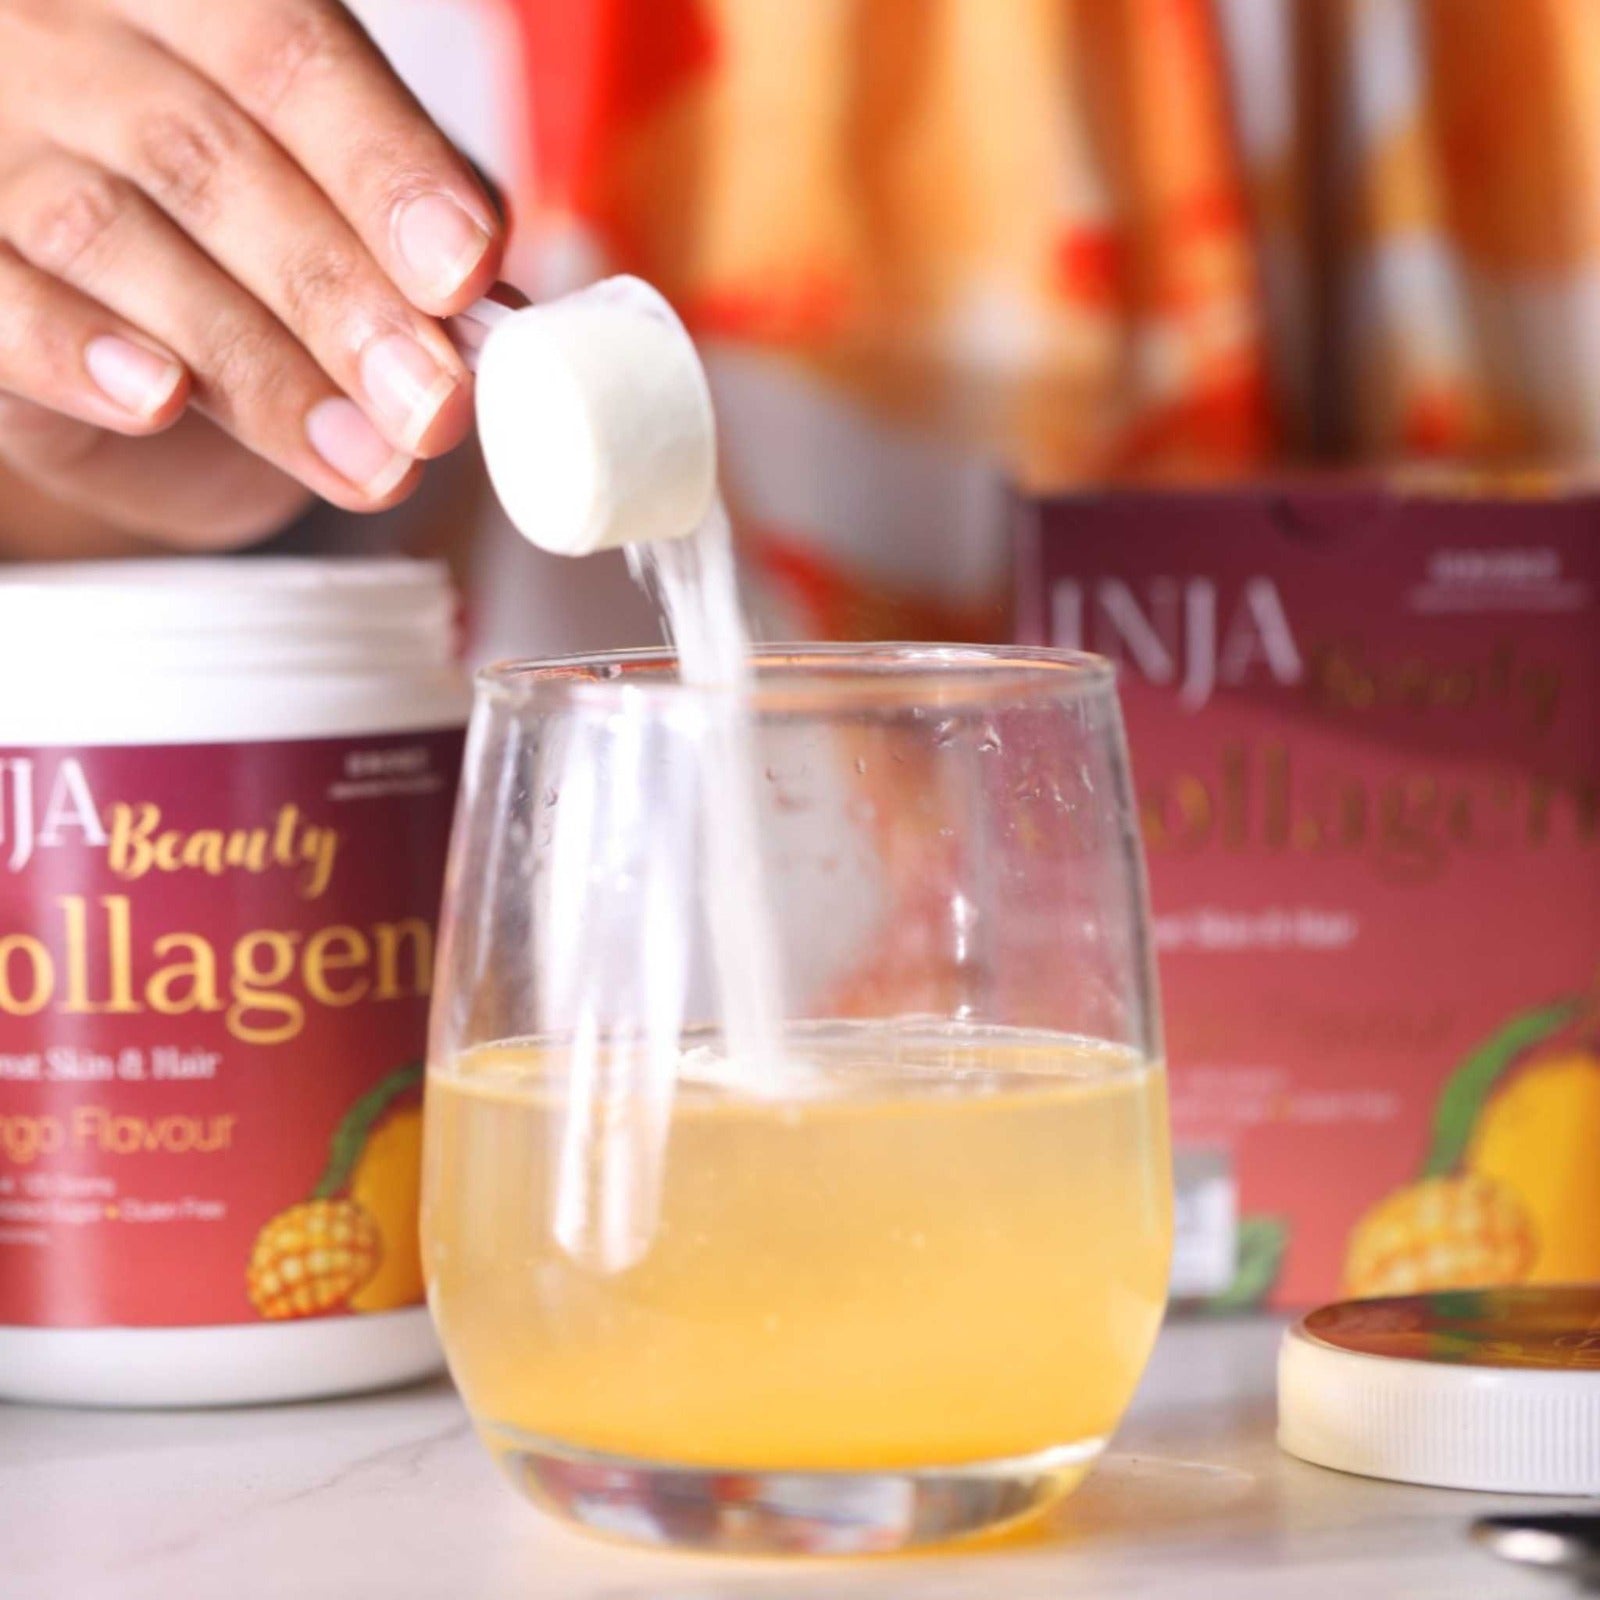 INJA Beauty Collagen for Skin, Hair & Nails, with Vit C, Glutathione,Biotin & more - Mango Flavour - CBD Store India